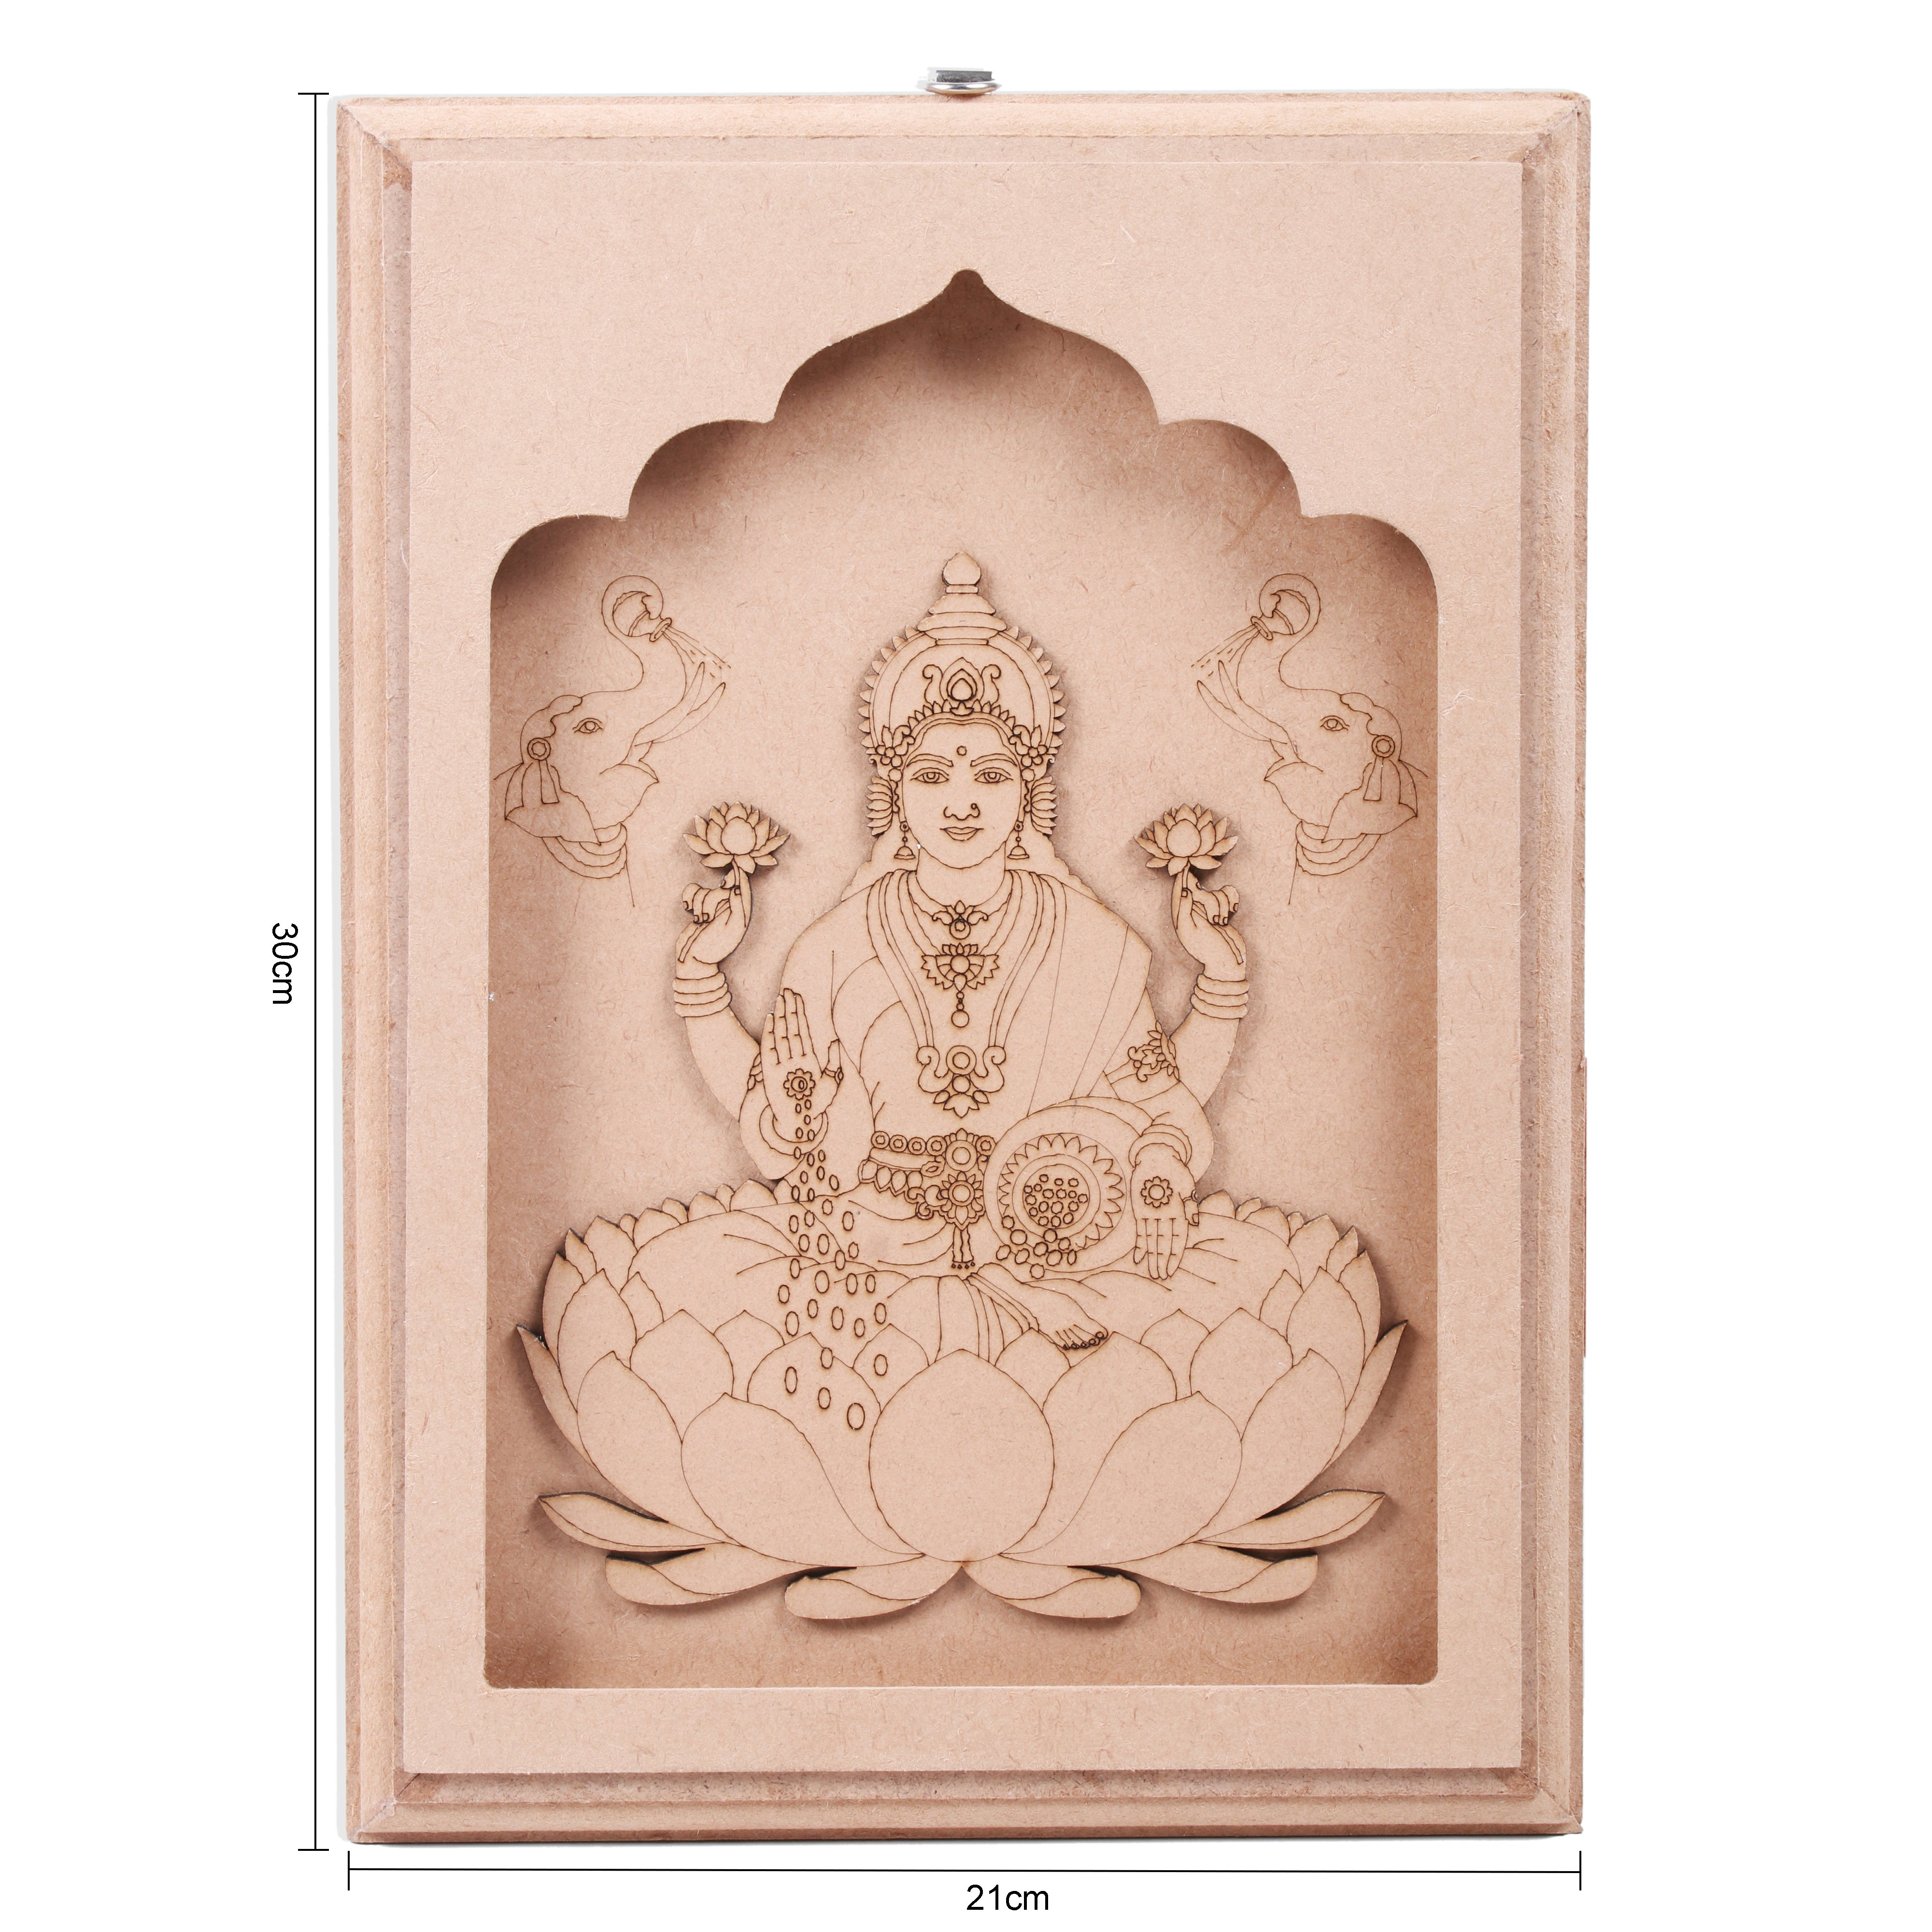 Pre -Marked MDF Hanging Decor with D-Ring - Gracious Lakshmi Frame. Size-12in x 8.5in